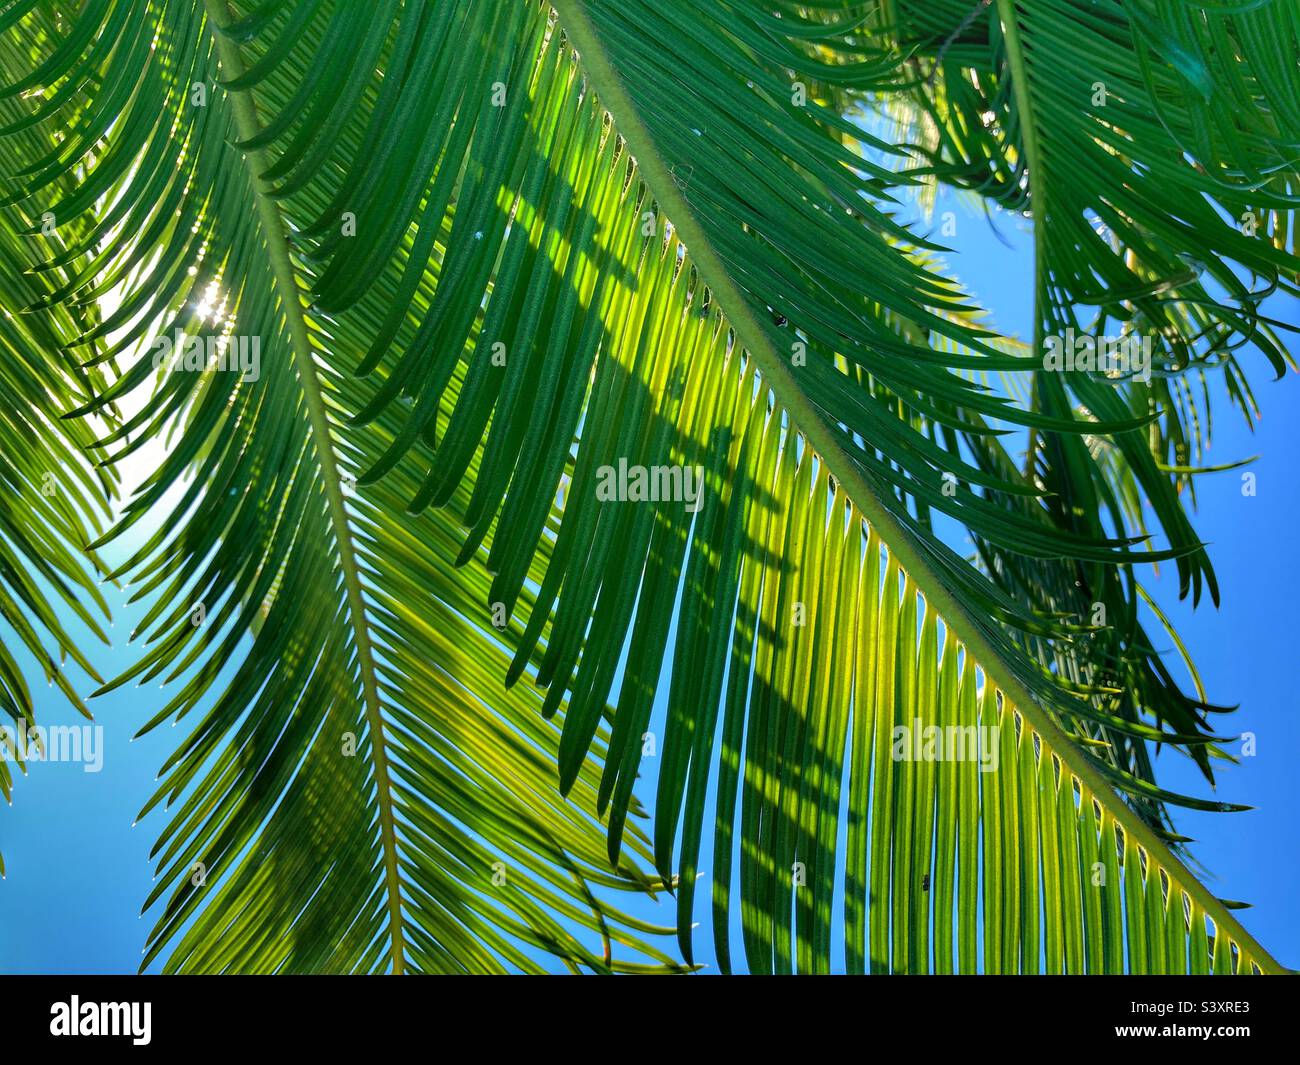 Green fronds of Sago palm seen from below, with blue sky above Stock Photo